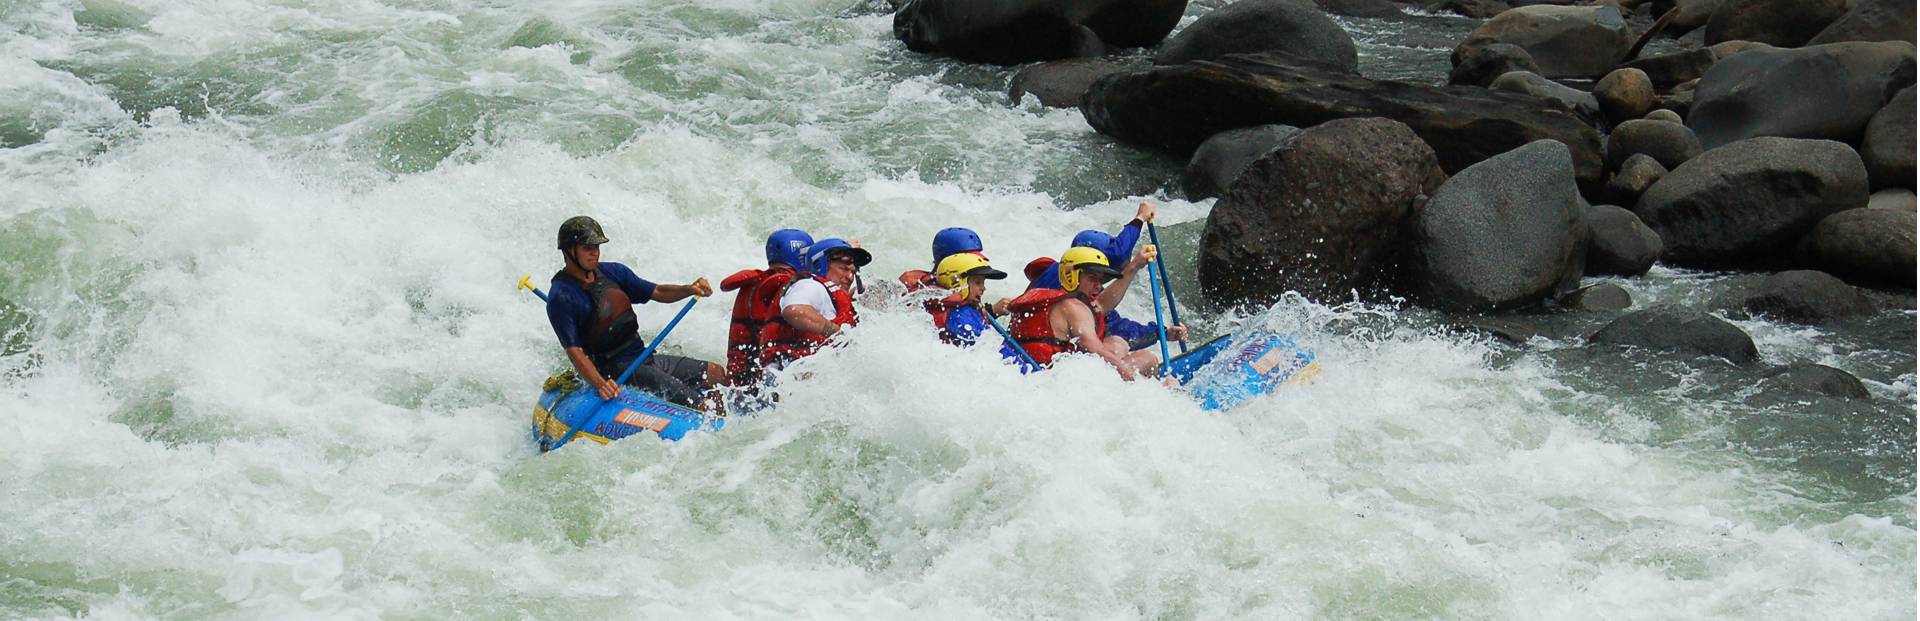 Costa Rica Pacuare River rafting with Serendipity